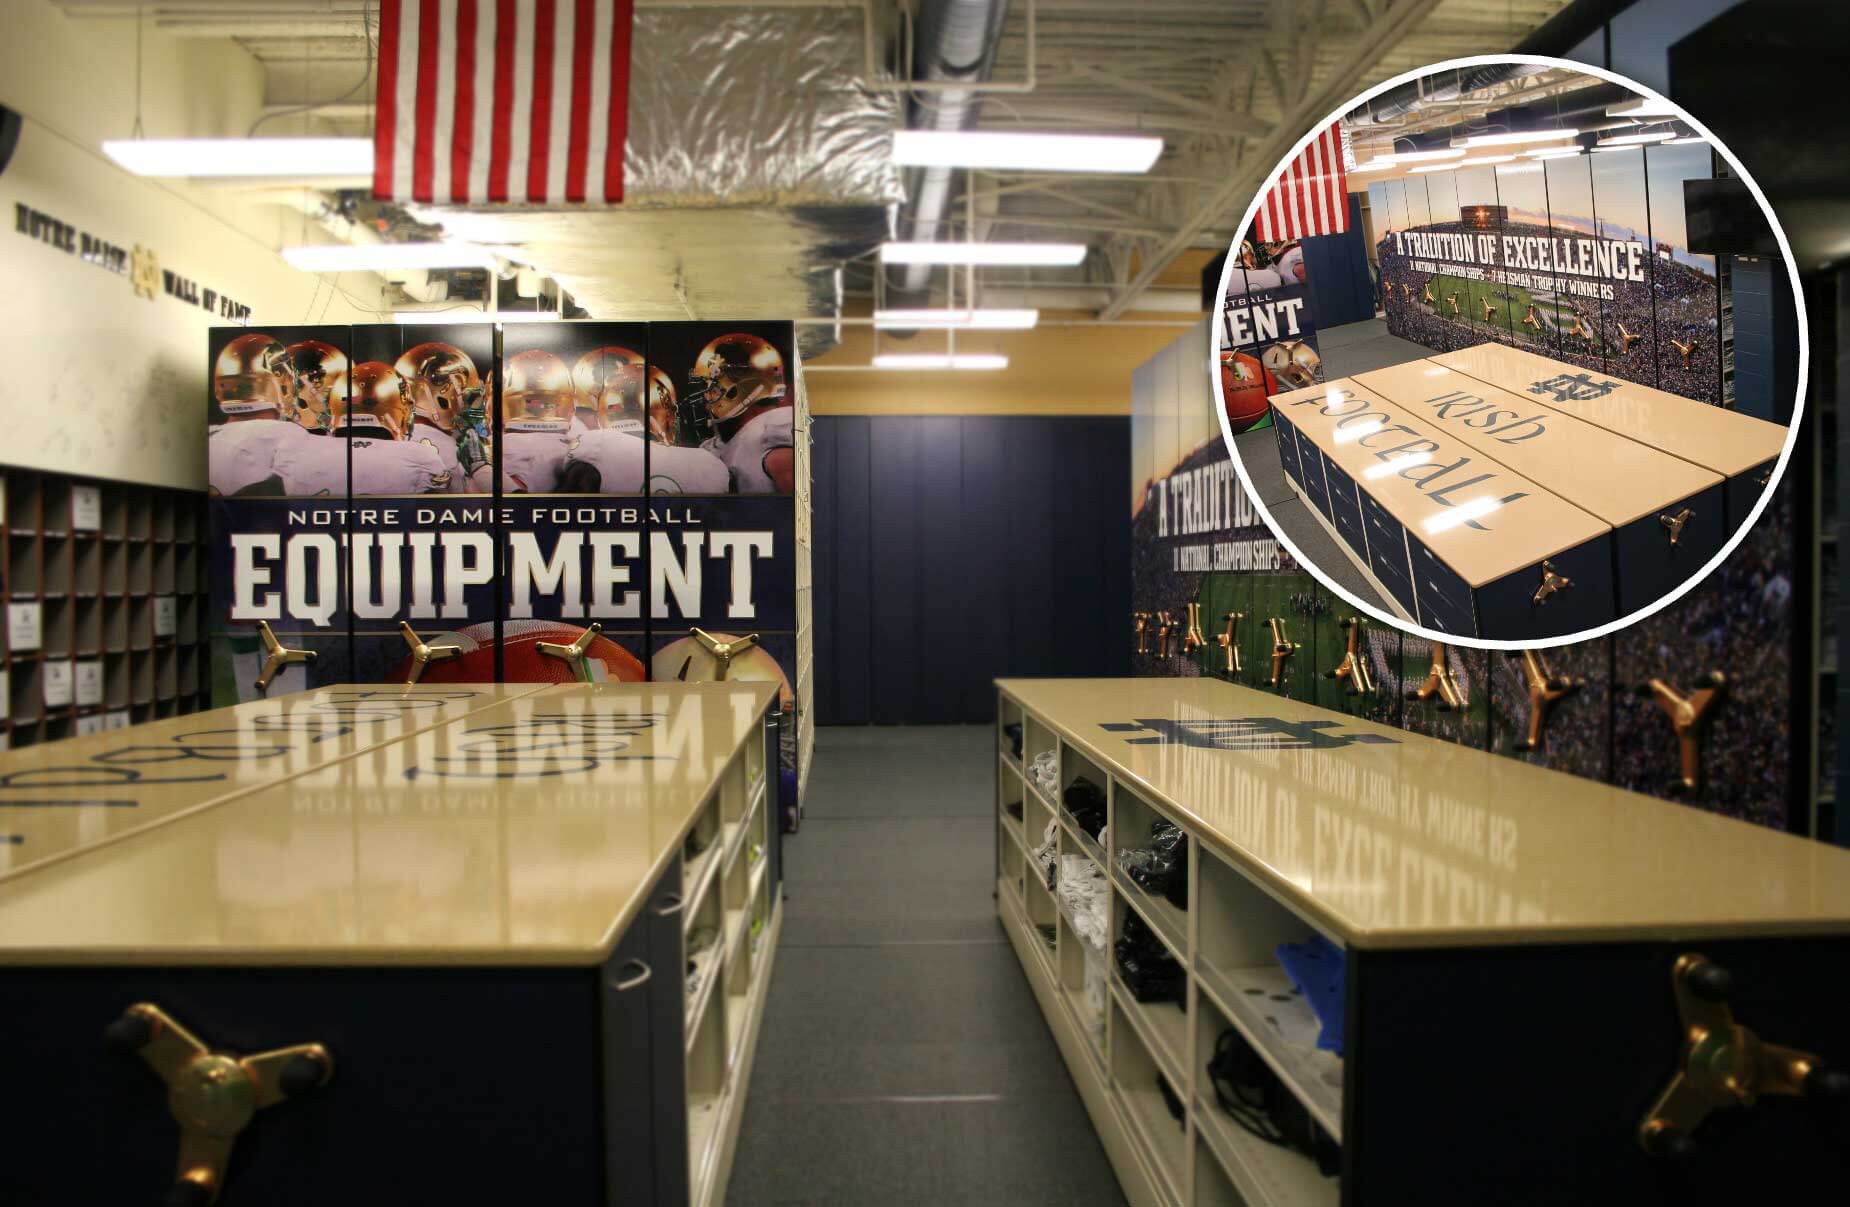 2022 aema athletic locker wall and laundry exchange cubbies